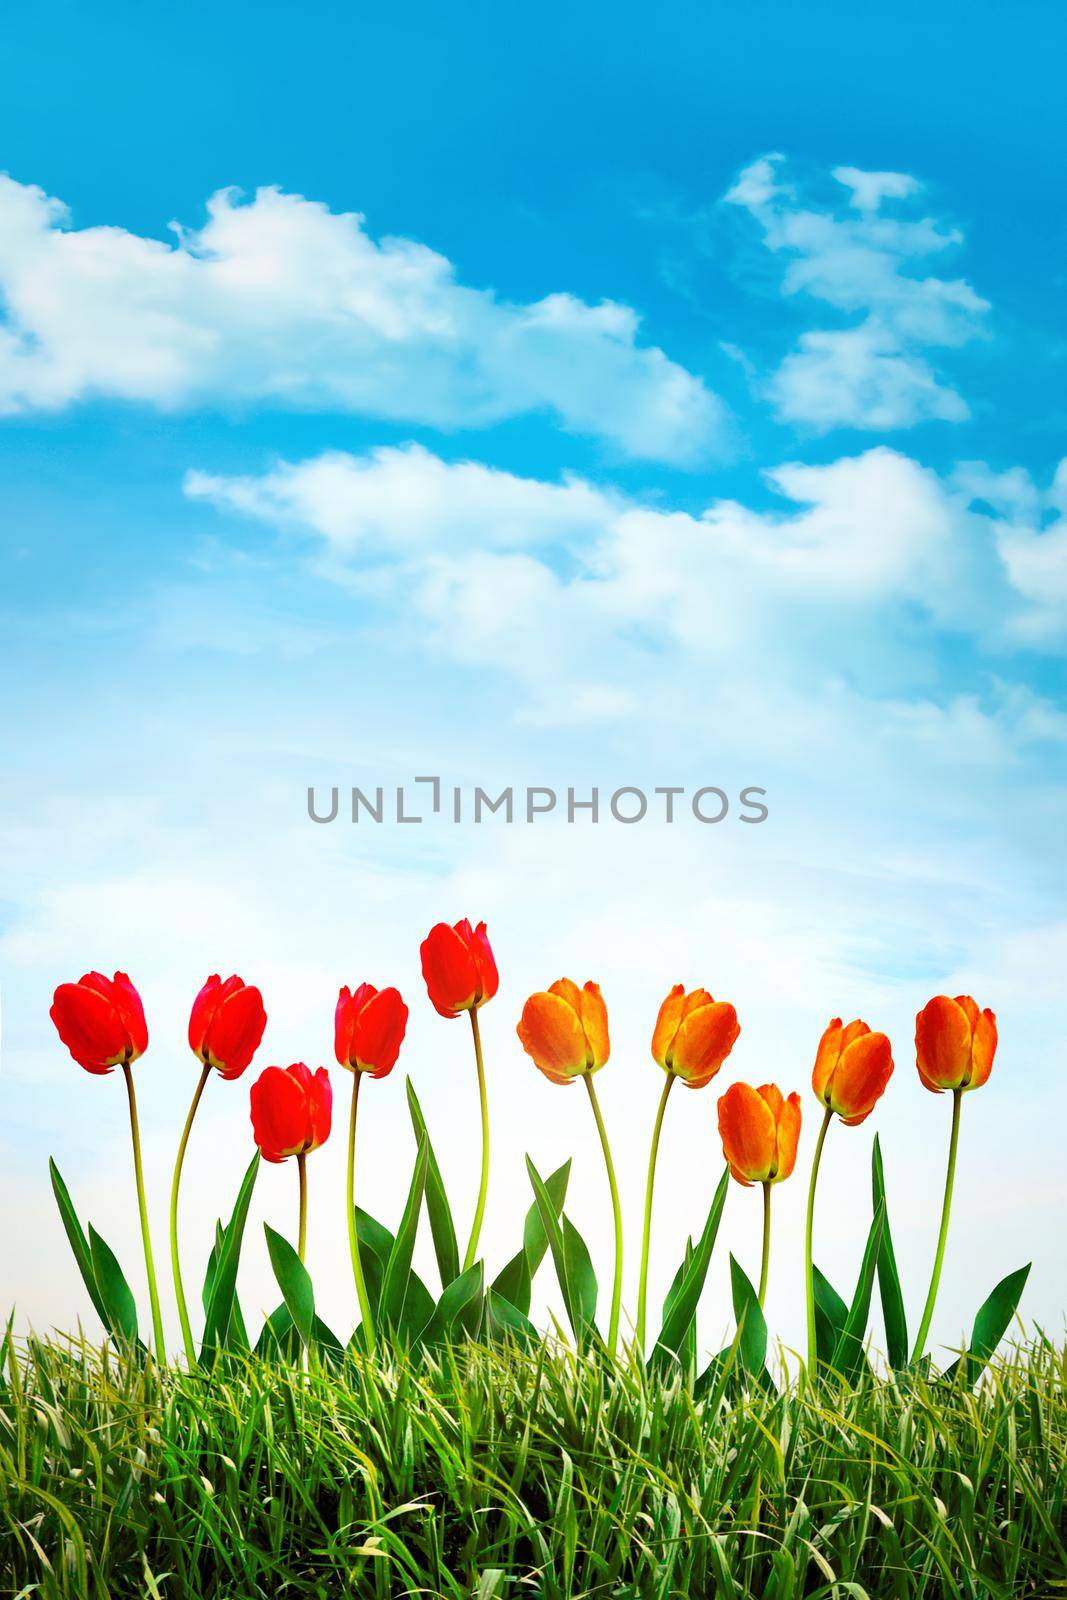 Red and orange tulips against a summer sky by Sandralise